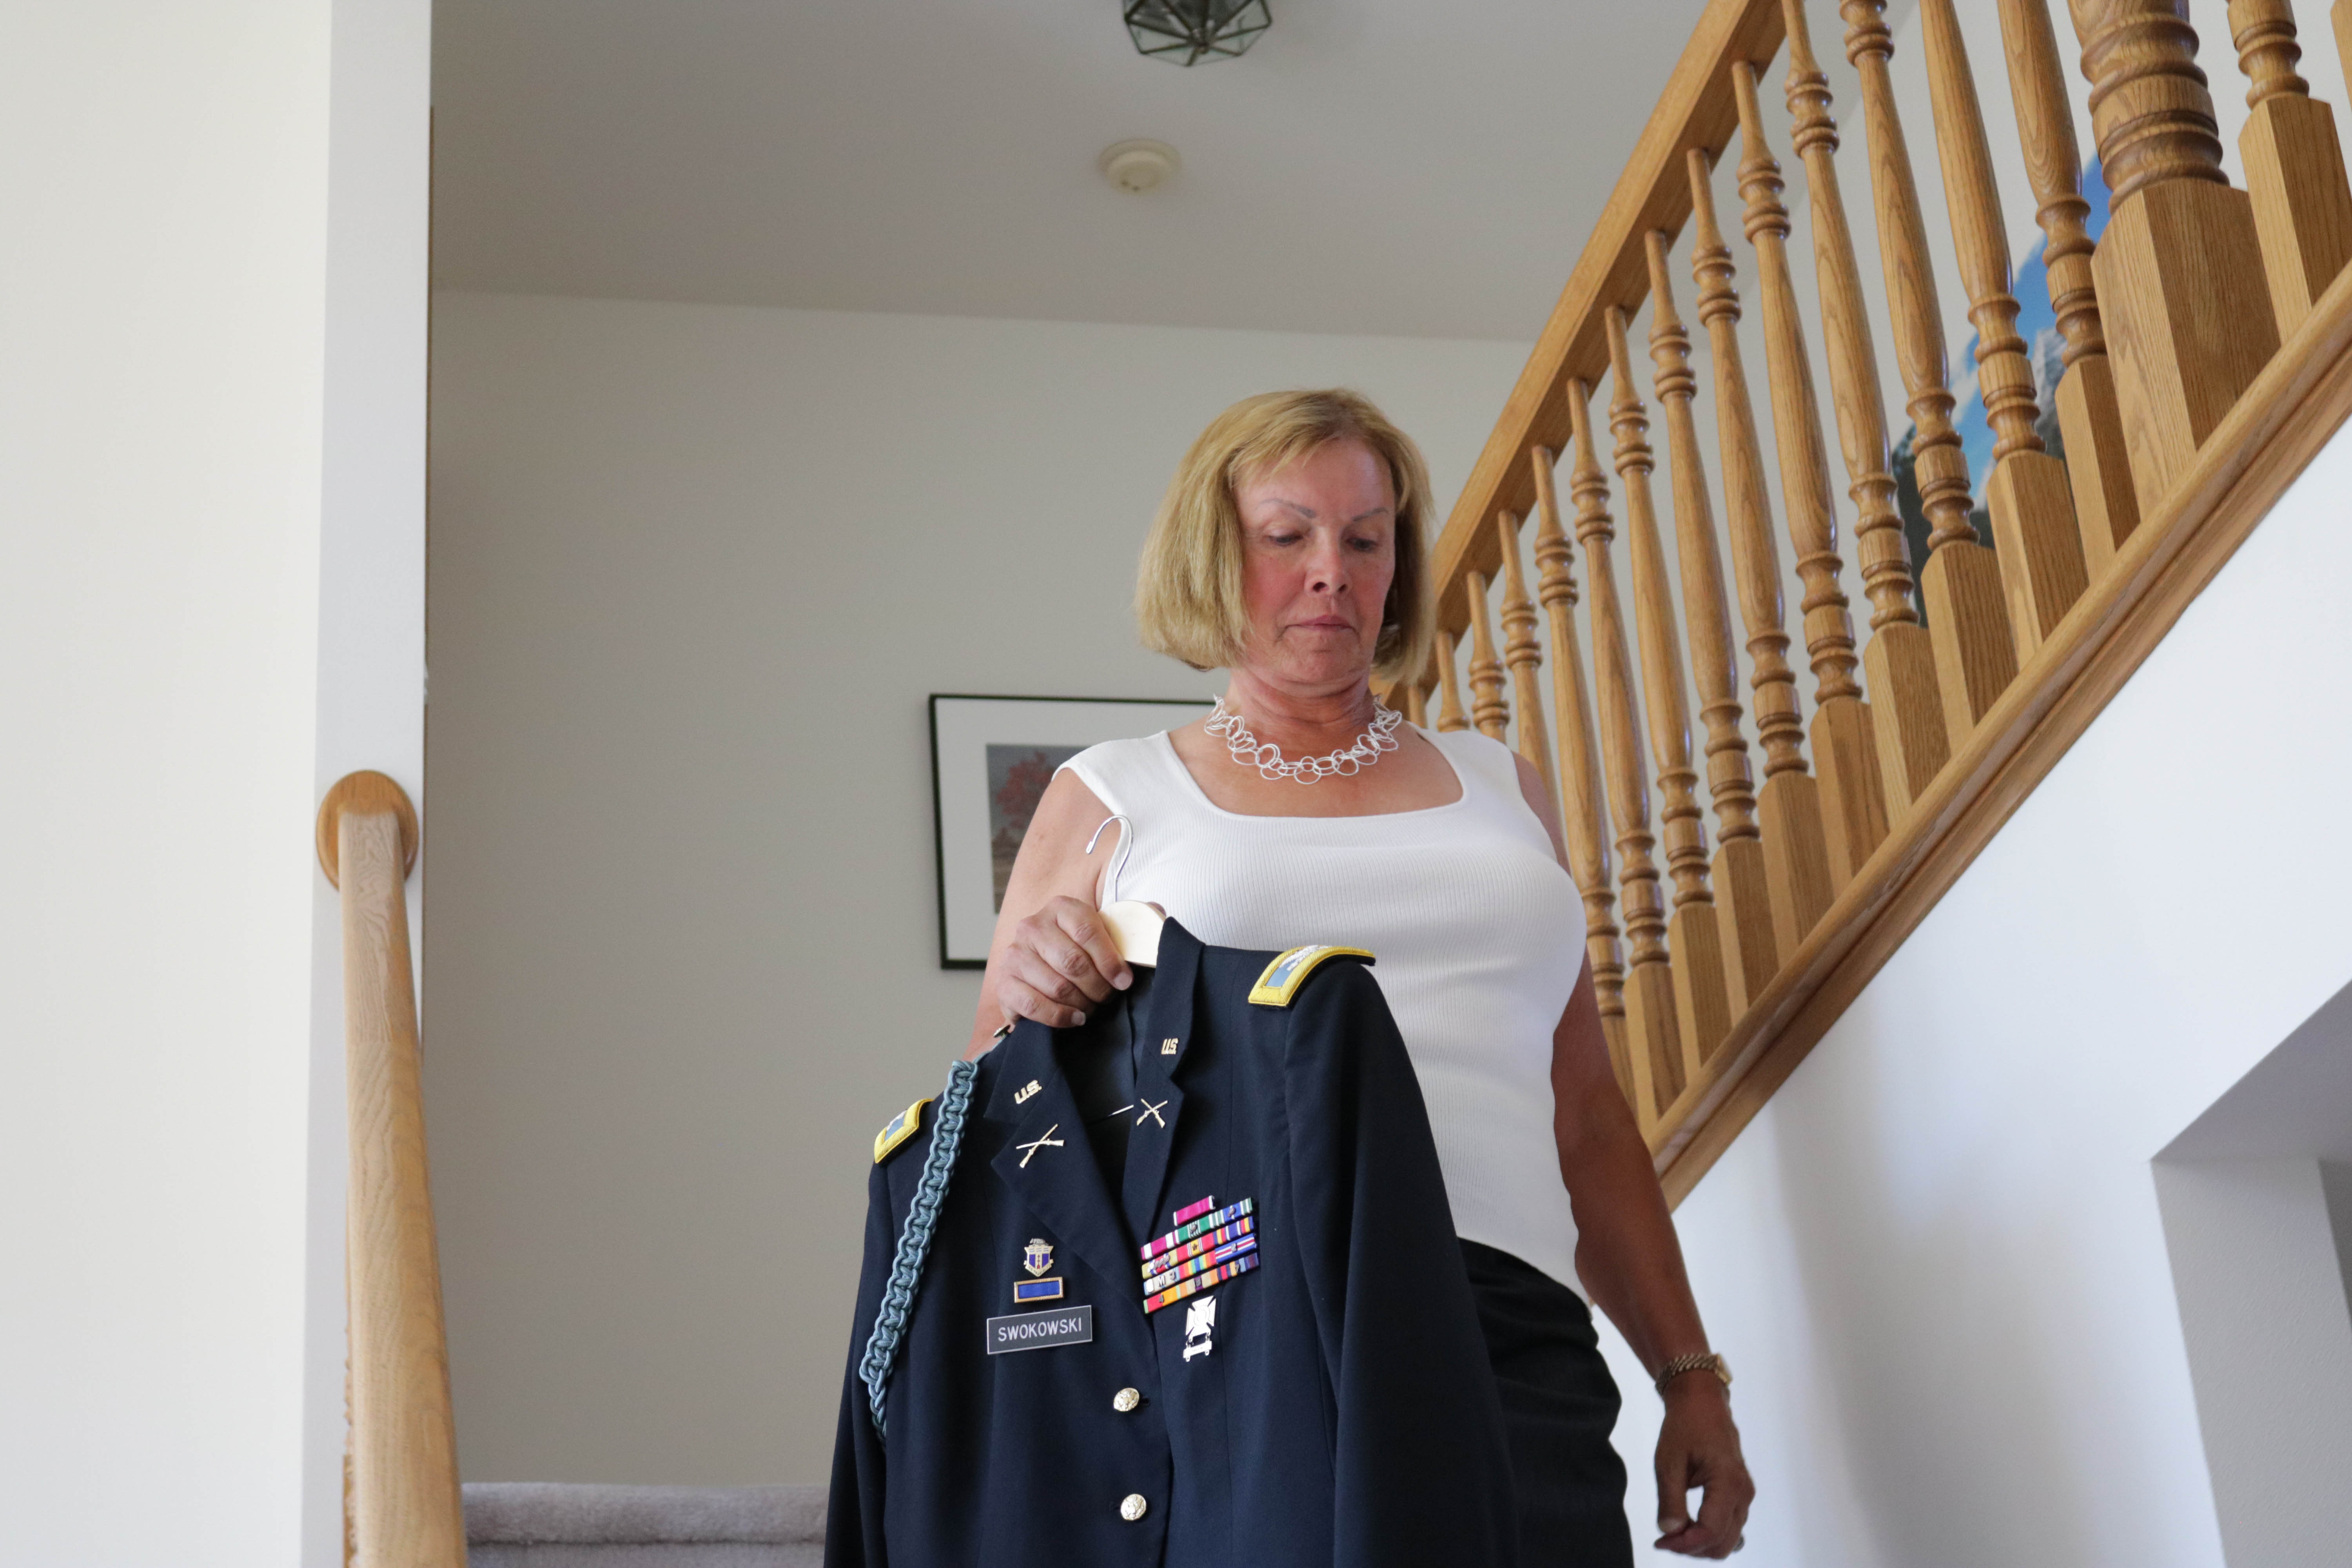 Former US Army Colonel and transgender Sheri Swokowski carries her uniform July 27, 2017 in DeForest, Wisconsin, the day following US President Donald Trumps announcing of a ban on transgender military members. DEREK R. HENKLE/AFP/Getty Images